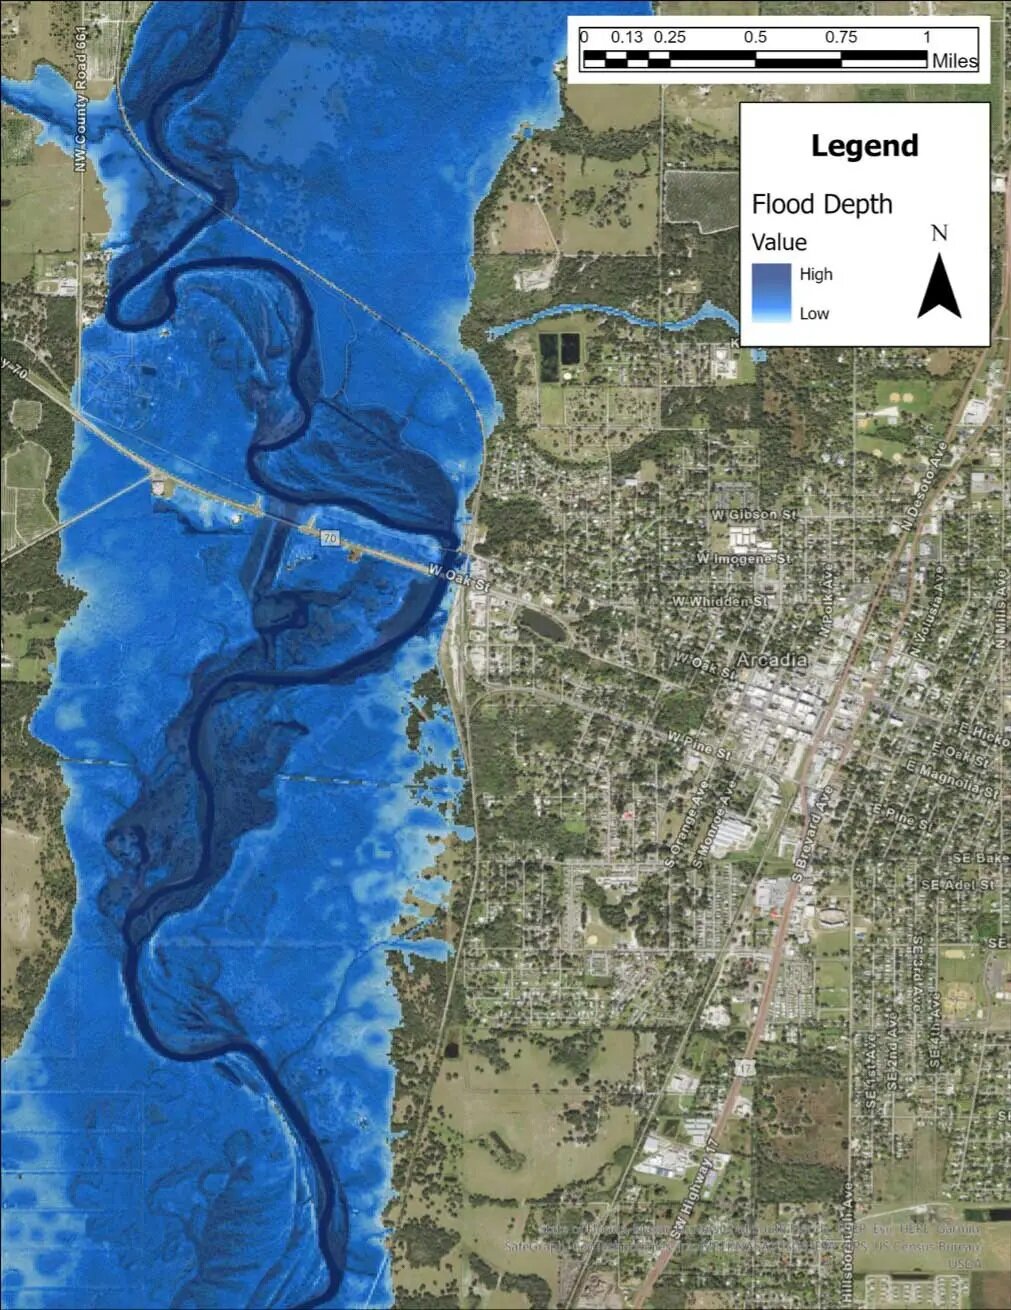 https://www.worldpropertyjournal.com/news-assets-2/Flood-Extent-of-the-Peace-River-in-Arcadia-Florida-After-Hurricane-Ian.jpg